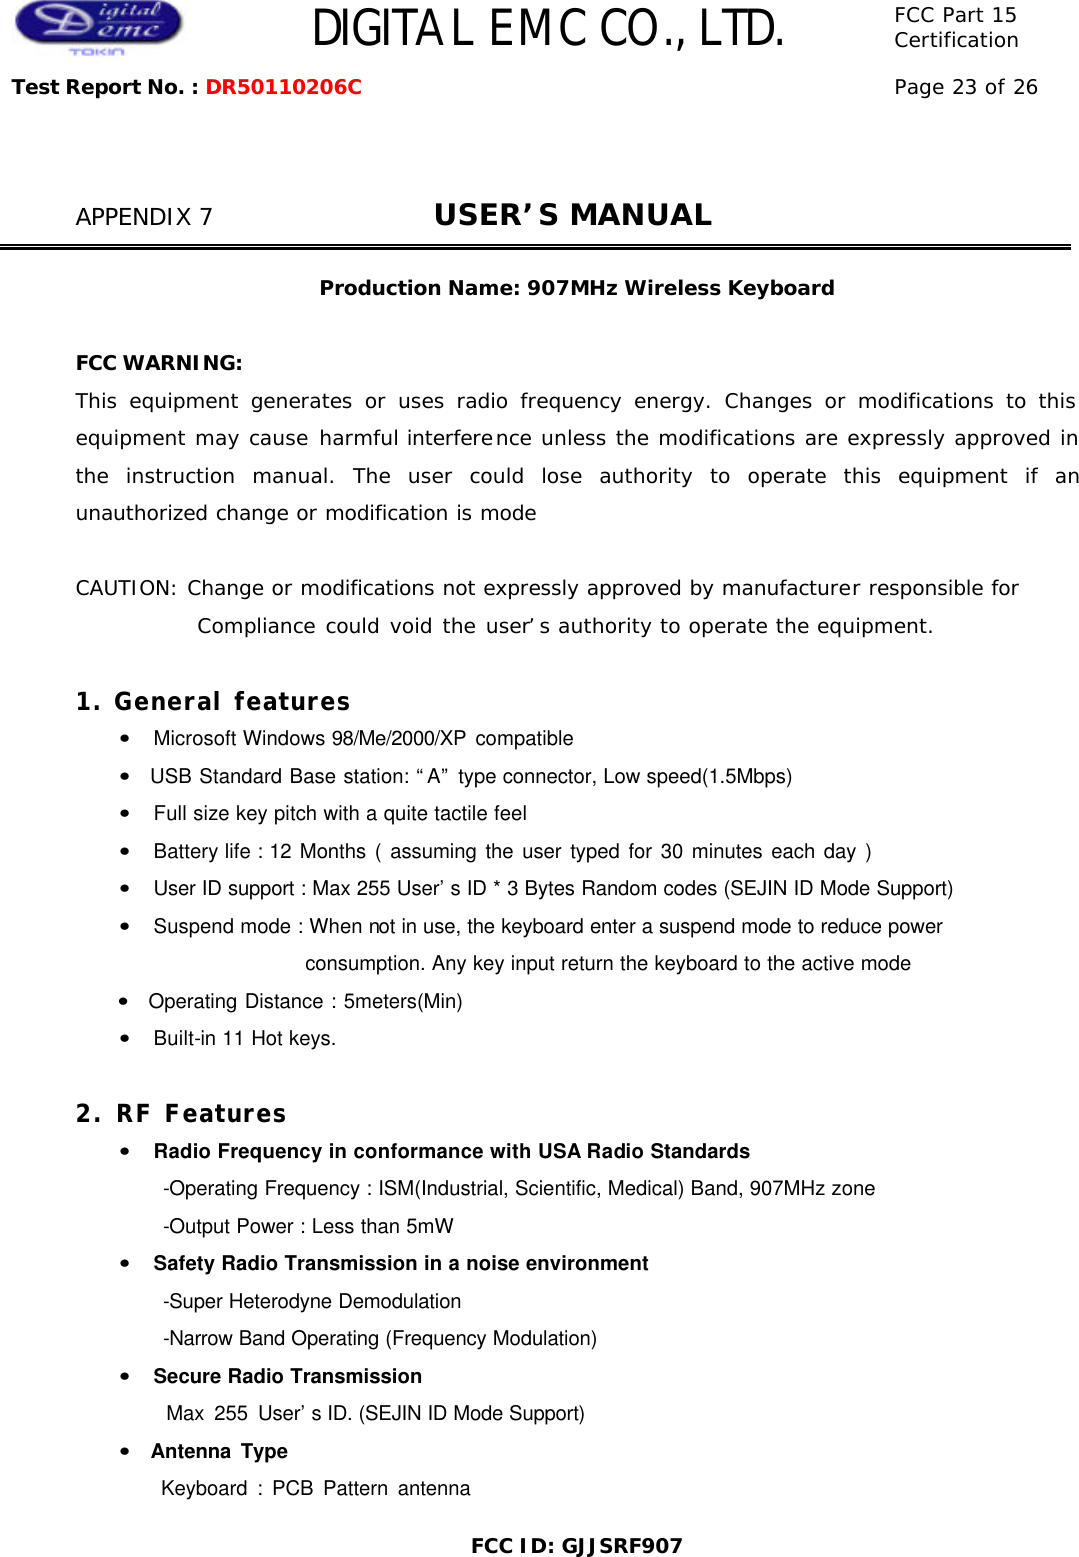  DIGITAL EMC CO., LTD. FCC Part 15 Certification Test Report No. : DR50110206C Page 23 of 26  FCC ID: GJJSRF907   APPENDIX 7              USER’S MANUAL    Production Name: 907MHz Wireless Keyboard  FCC WARNING: This equipment generates or uses radio frequency energy. Changes or modifications to this equipment may cause harmful interference unless the modifications are expressly approved in the instruction manual. The user could lose authority to operate this equipment if an unauthorized change or modification is mode  CAUTION: Change or modifications not expressly approved by manufacturer responsible for             Compliance could void the user’s authority to operate the equipment.  1. General features     •  Microsoft Windows 98/Me/2000/XP compatible     •  USB Standard Base station: “A” type connector, Low speed(1.5Mbps)     •  Full size key pitch with a quite tactile feel       •  Battery life : 12 Months ( assuming the user typed for 30 minutes each day )                  •  User ID support : Max 255 User’s ID * 3 Bytes Random codes (SEJIN ID Mode Support)     •  Suspend mode : When not in use, the keyboard enter a suspend mode to reduce power   consumption. Any key input return the keyboard to the active mode •  Operating Distance : 5meters(Min)     •  Built-in 11 Hot keys.  2. RF Features     •  Radio Frequency in conformance with USA Radio Standards           -Operating Frequency : ISM(Industrial, Scientific, Medical) Band, 907MHz zone         -Output Power : Less than 5mW     •  Safety Radio Transmission in a noise environment         -Super Heterodyne Demodulation         -Narrow Band Operating (Frequency Modulation)     •  Secure Radio Transmission            Max 255 User’s ID. (SEJIN ID Mode Support)       •  Antenna Type          Keyboard : PCB Pattern antenna 